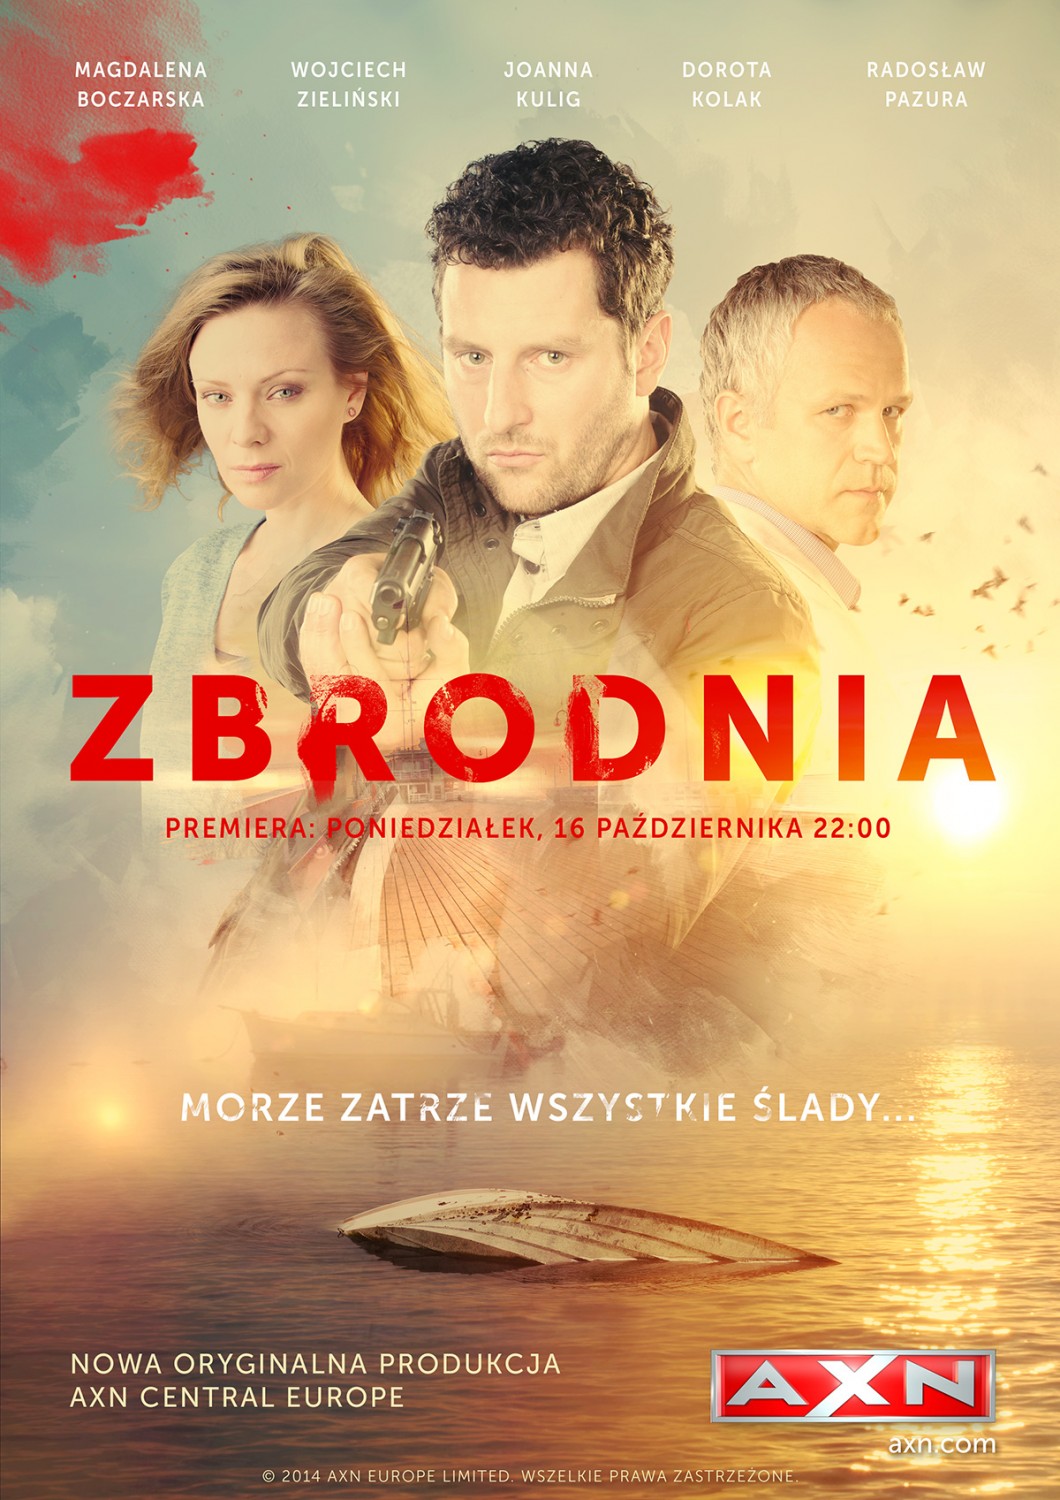 Extra Large TV Poster Image for Zbrodnia (#1 of 2)